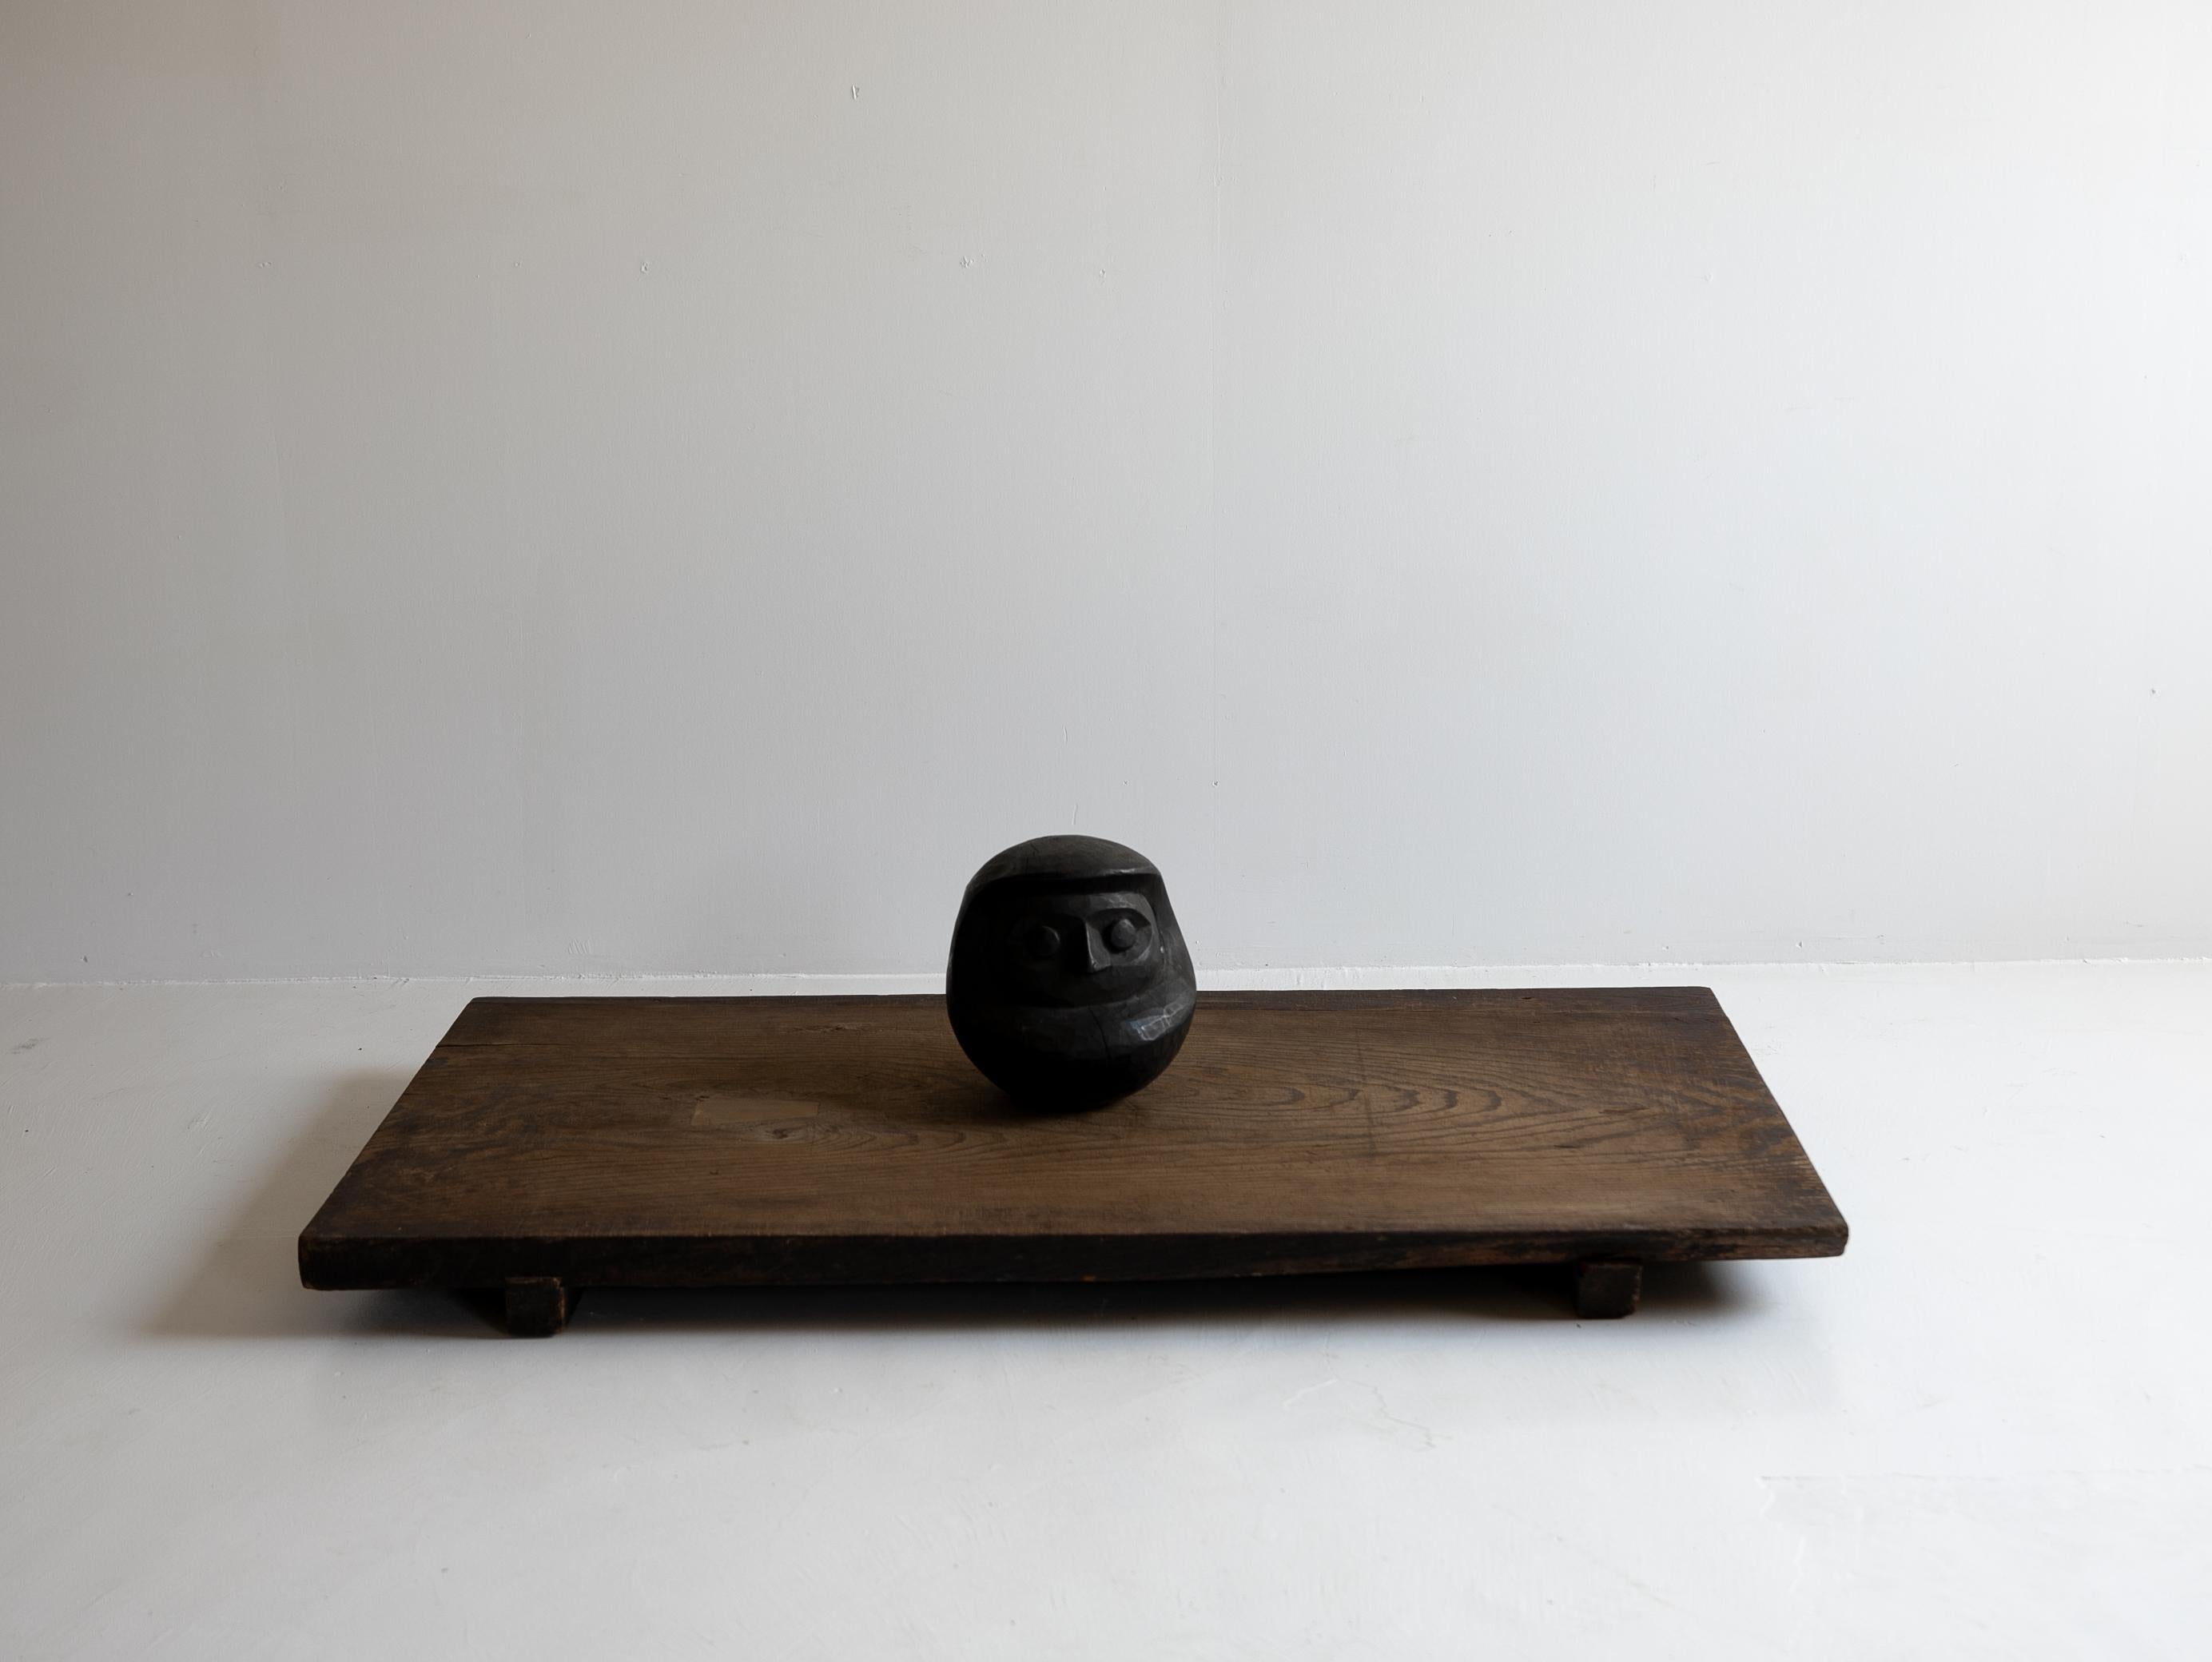 Meiji Japanese Antique Wabi Sabi Wooden Board 1860s-1900s / Abstract Art Low Table For Sale